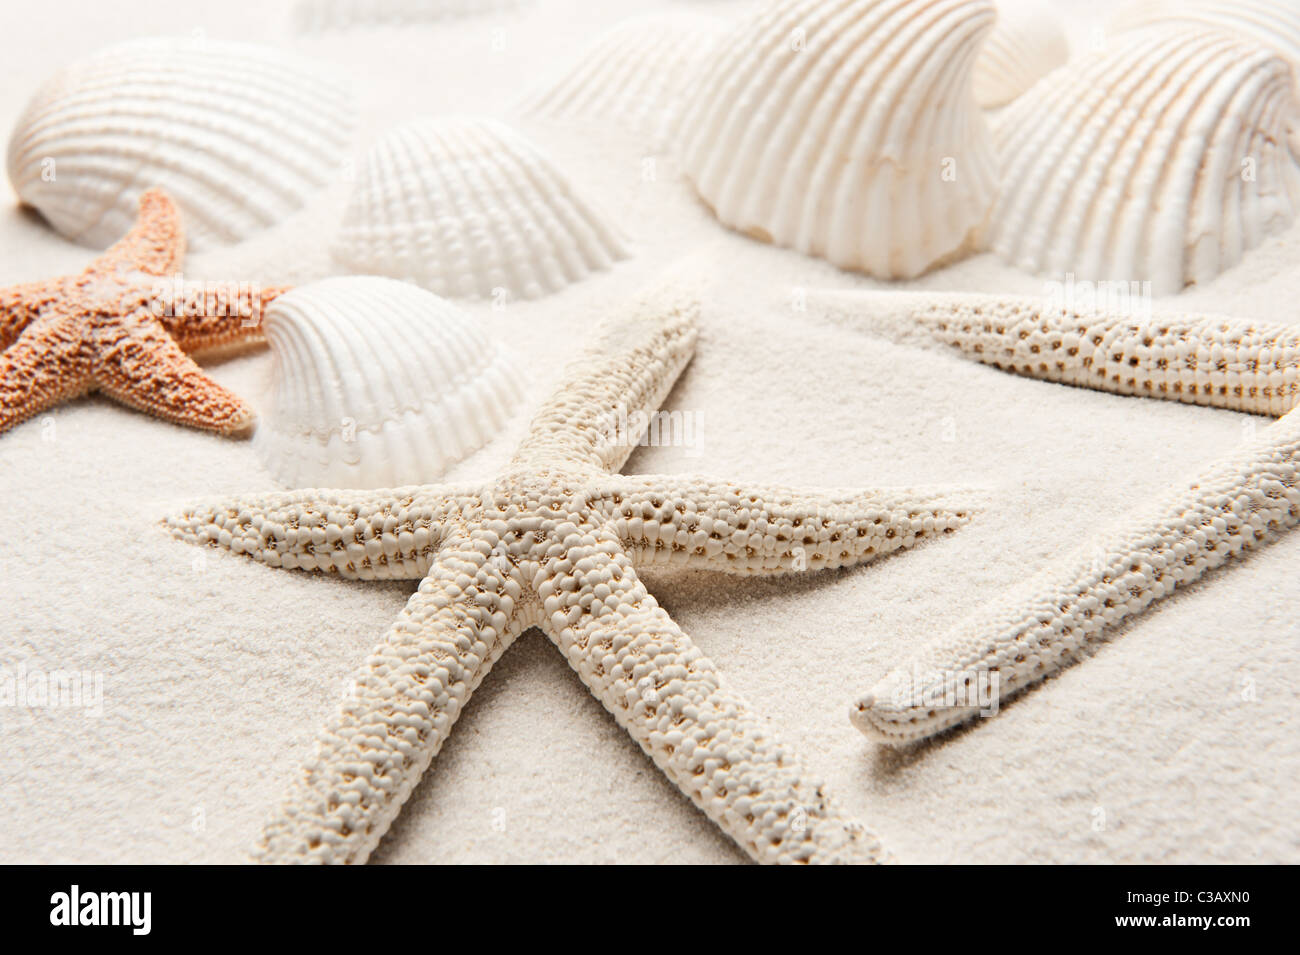 White starfish on white sand with clamshells in the background Stock Photo